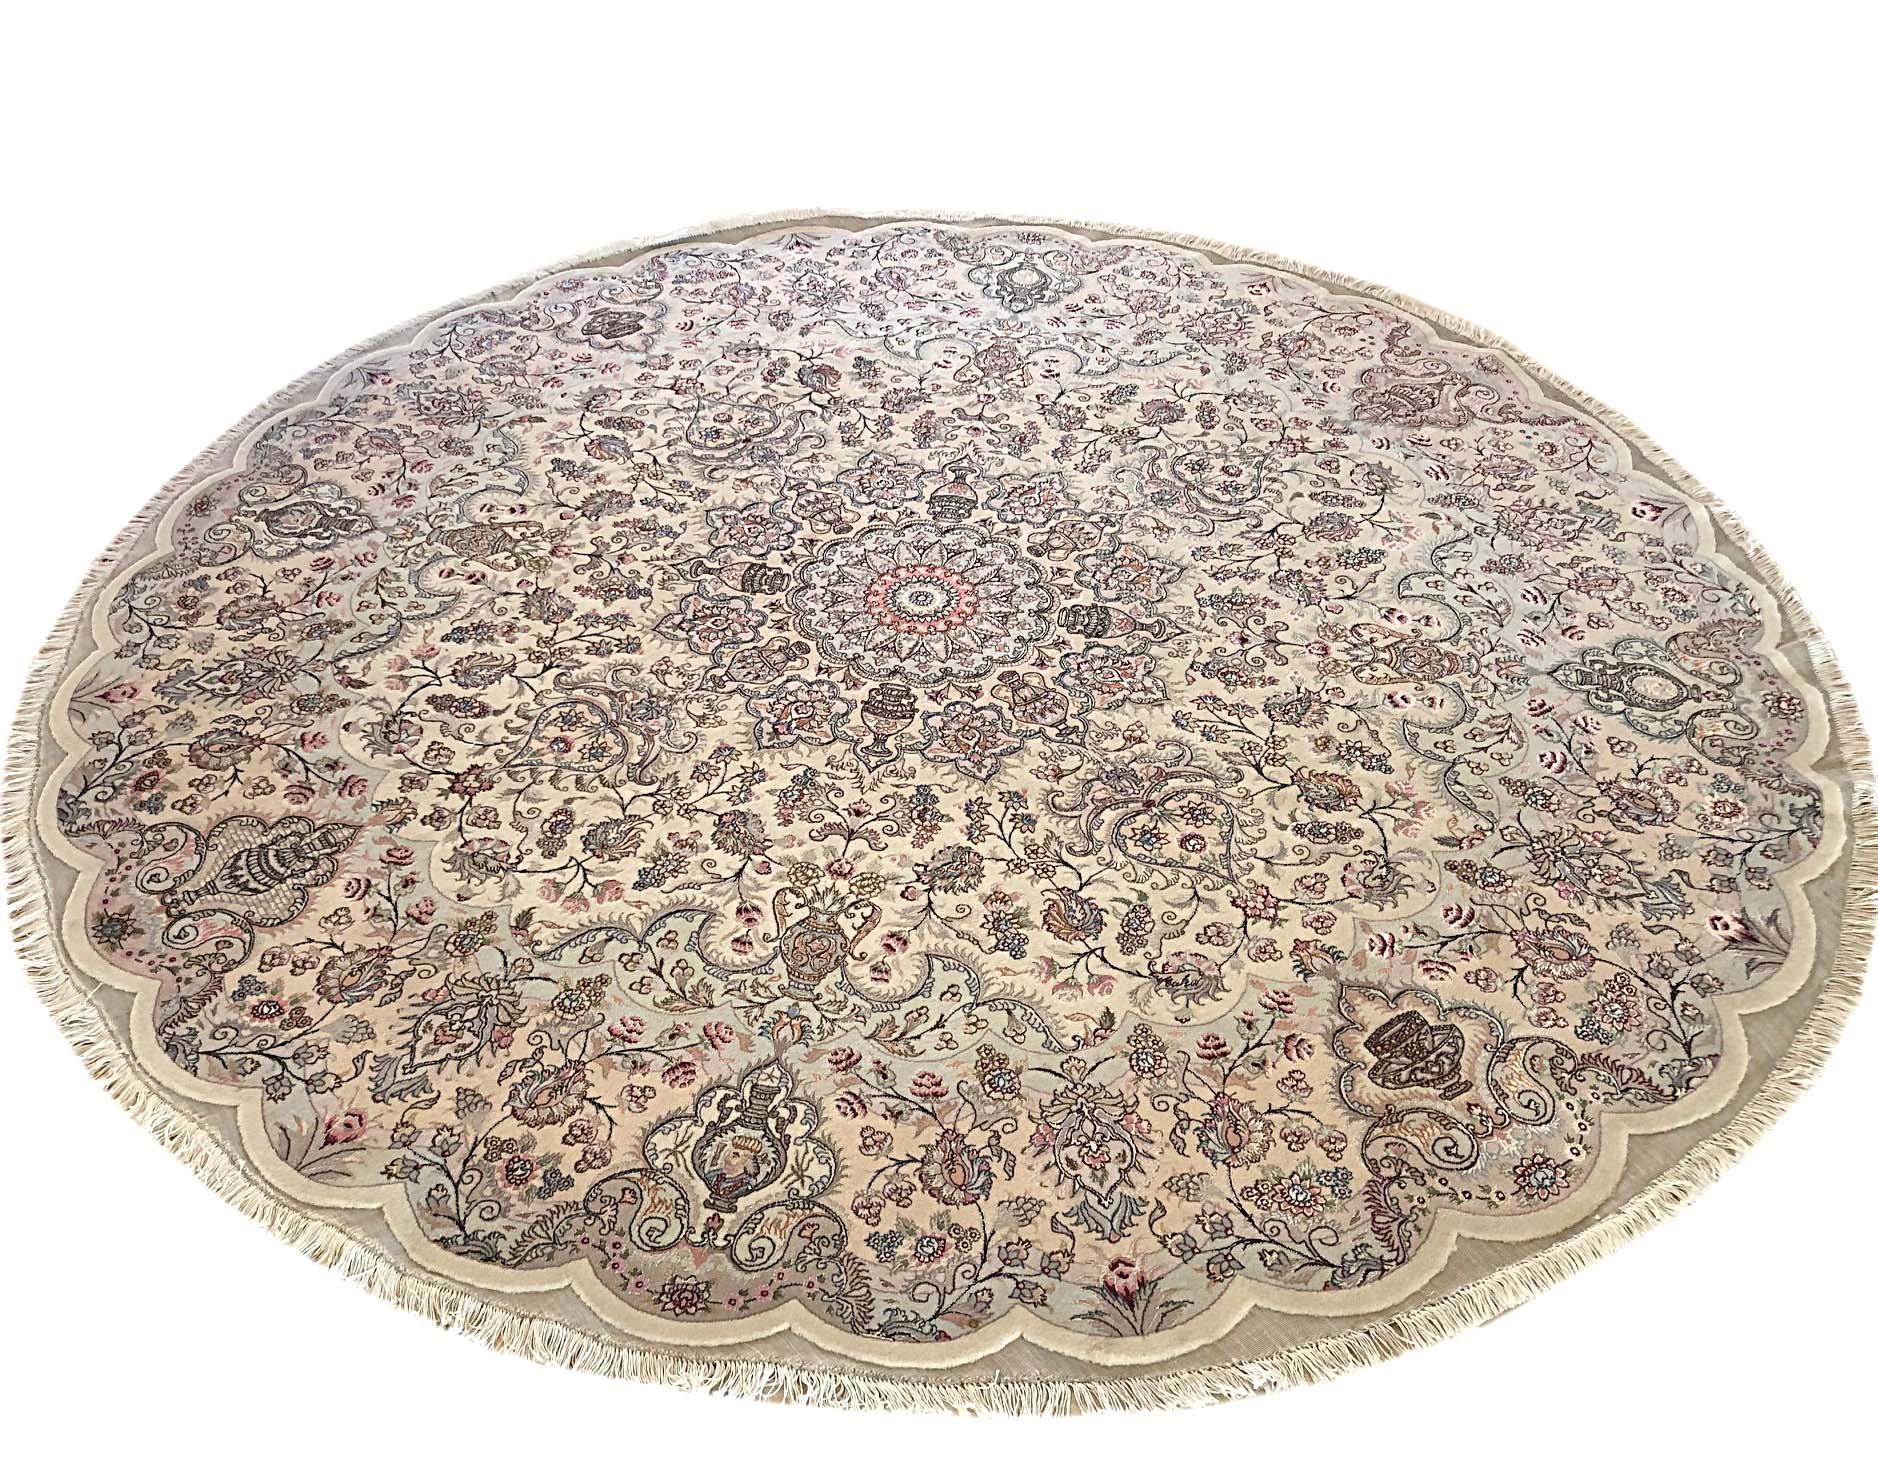 This authentic Persian handmade rug has wool and silk pile with cotton foundation. This beautiful rug is from Tabriz and the design is medallion floral. The base color is cream and the border is light peach. Tabriz rugs are very popular and in great